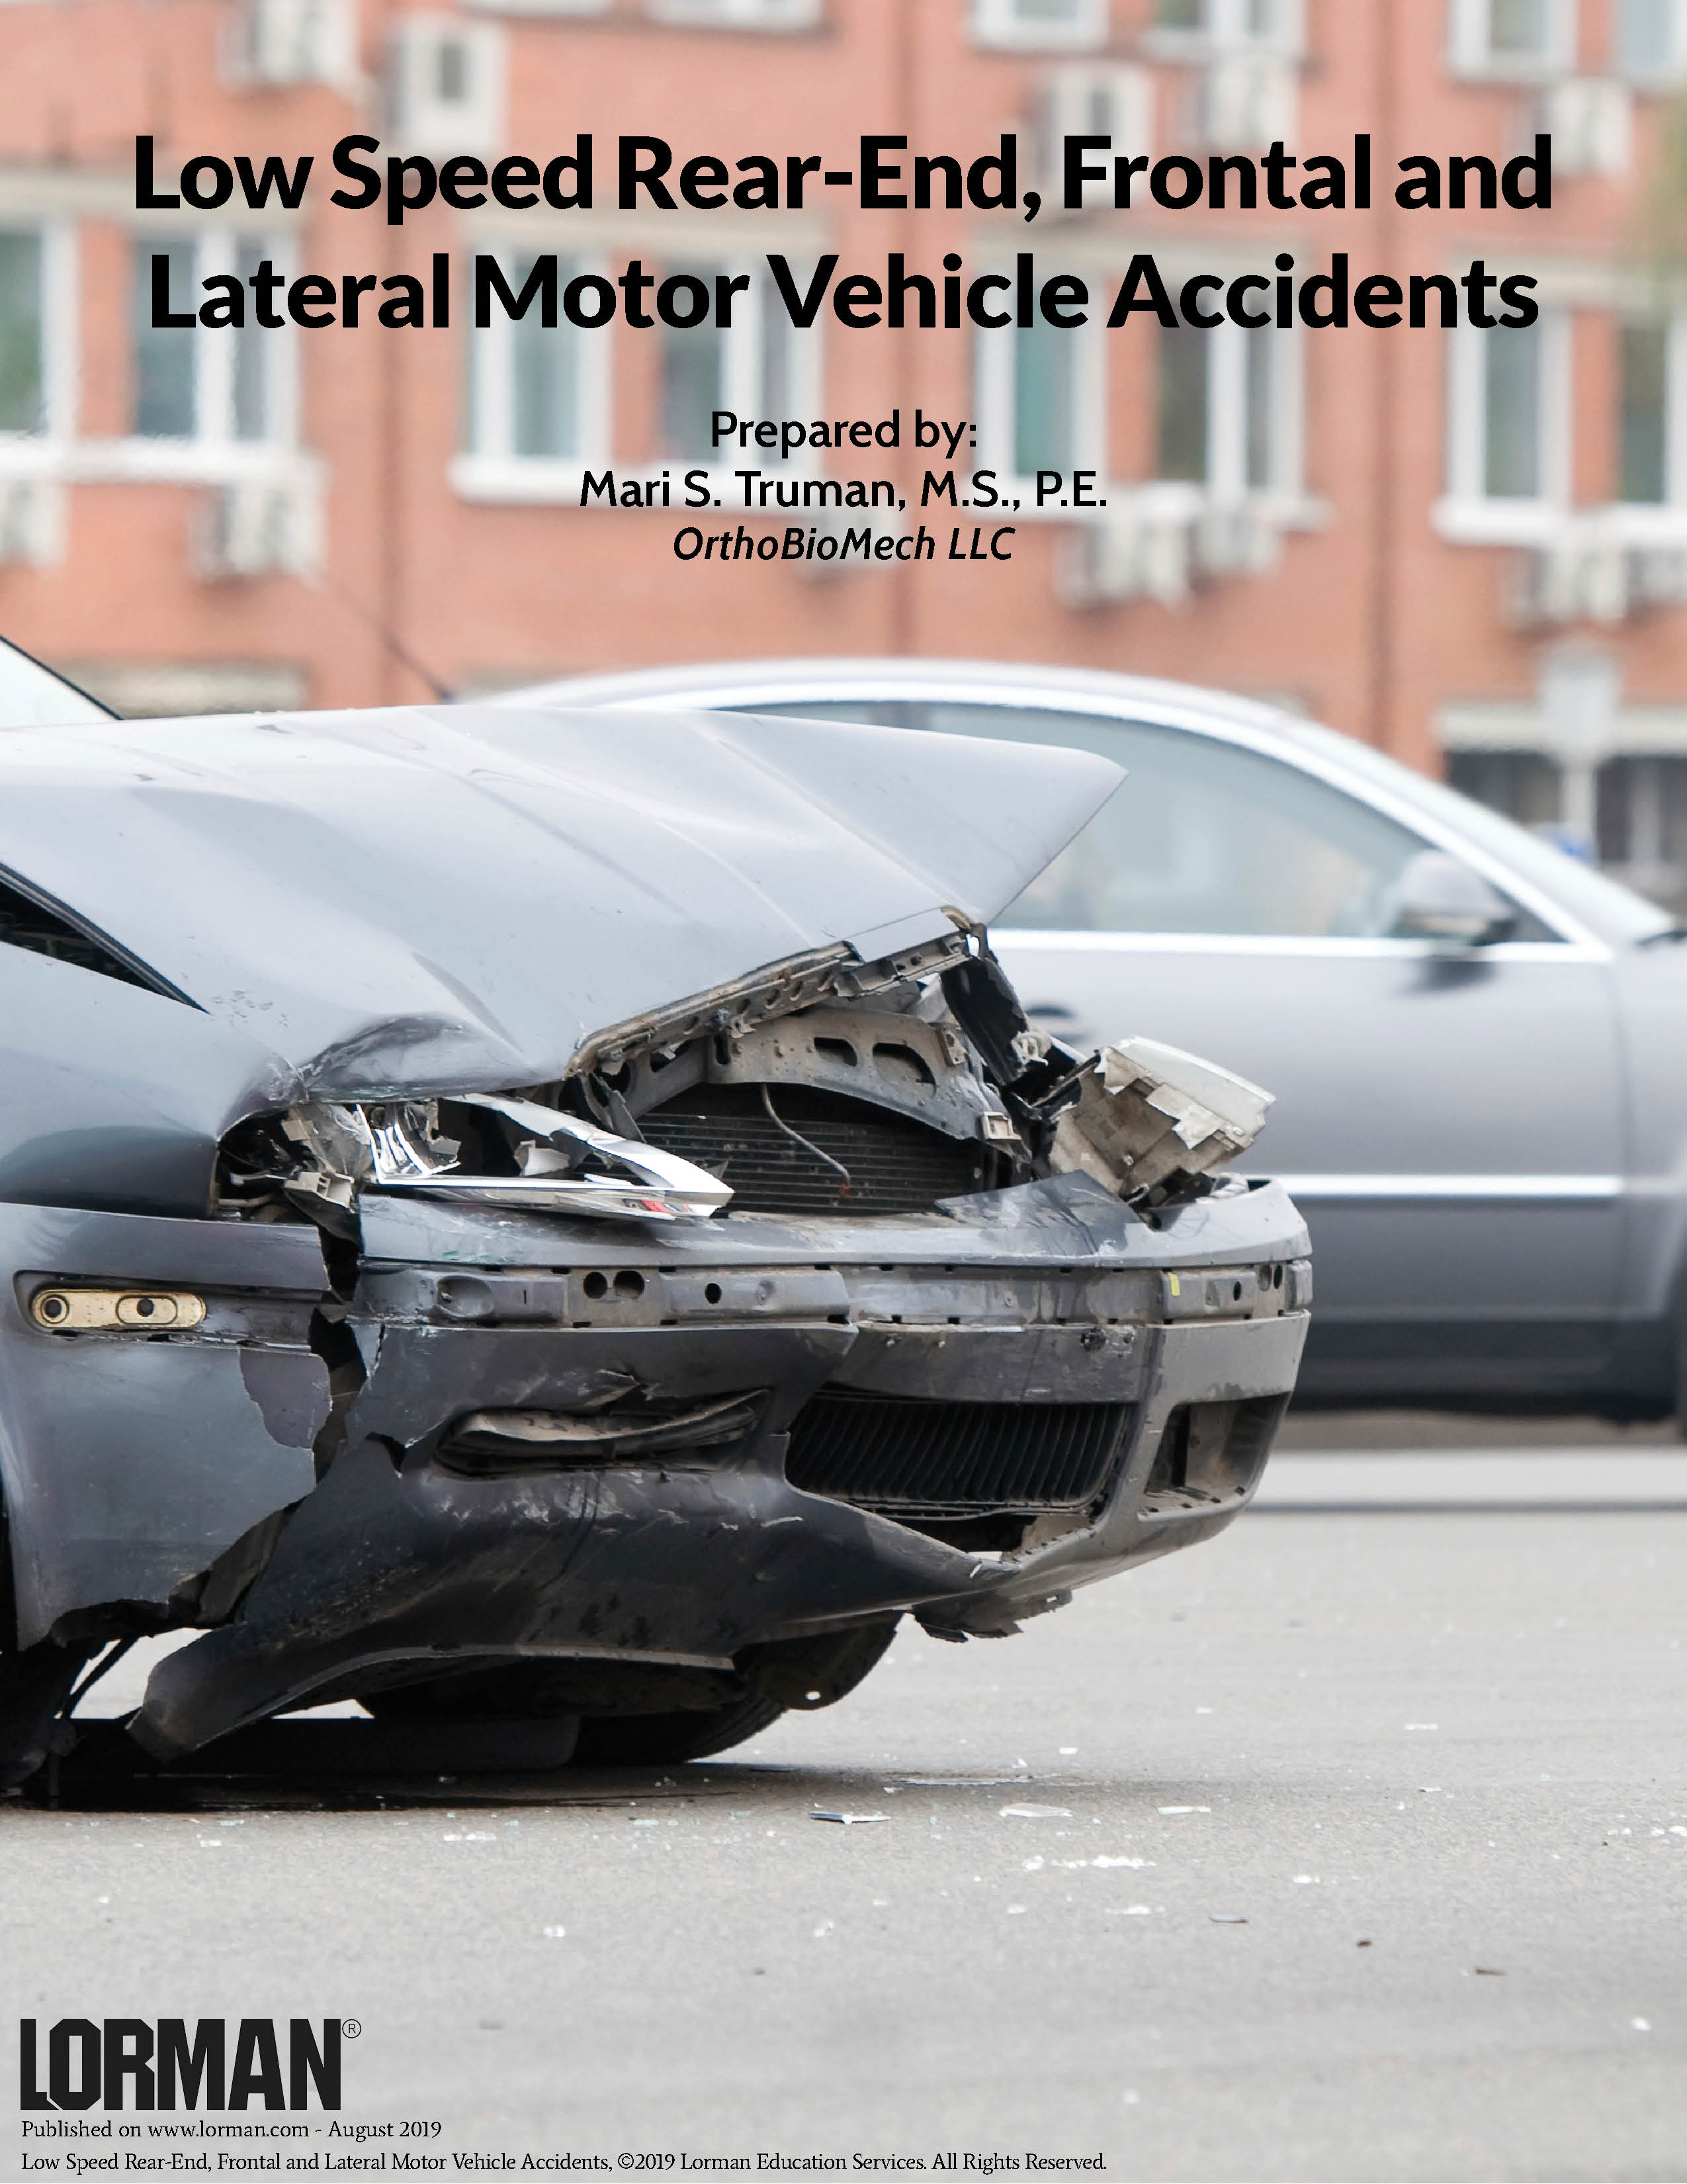 Low Speed Rear-End, Frontal and Lateral Motor Vehicle Accidents